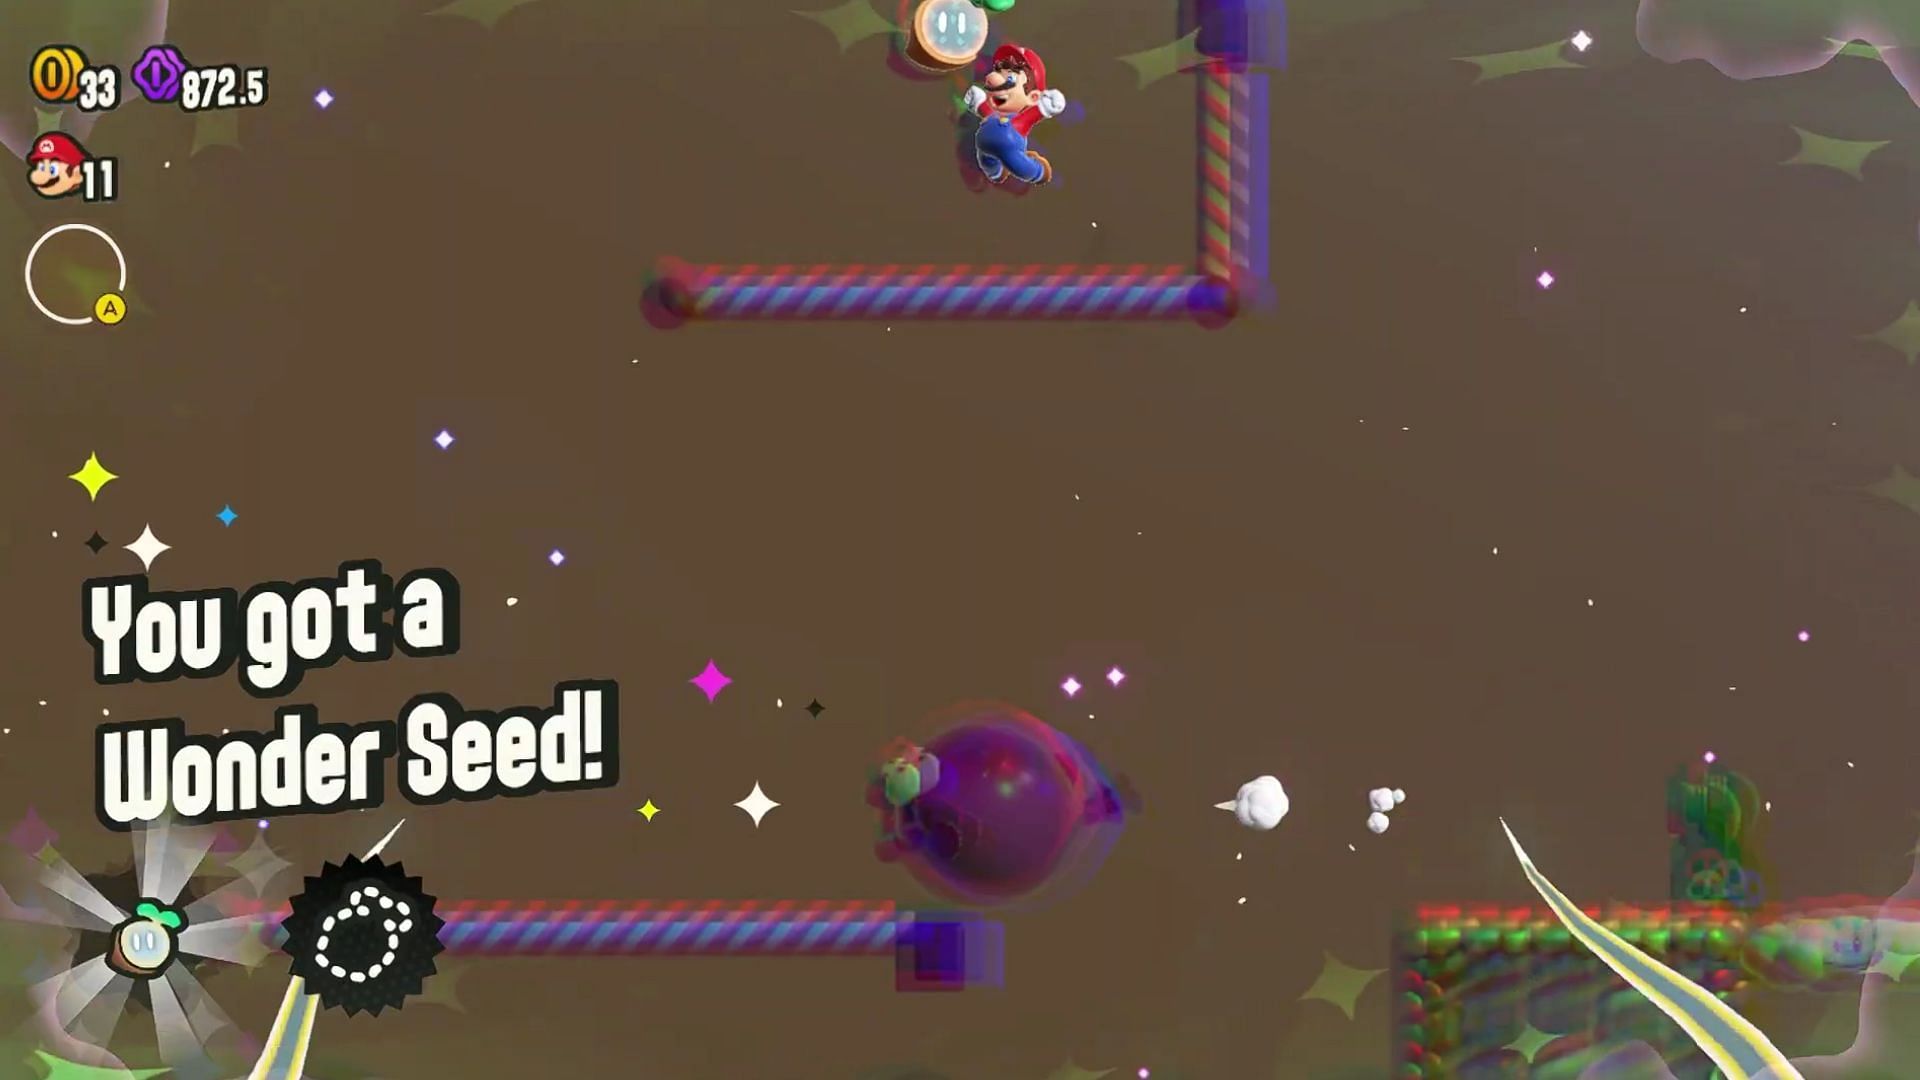 Super Mario Bros. Wonder' makers explain new gameplay — and the